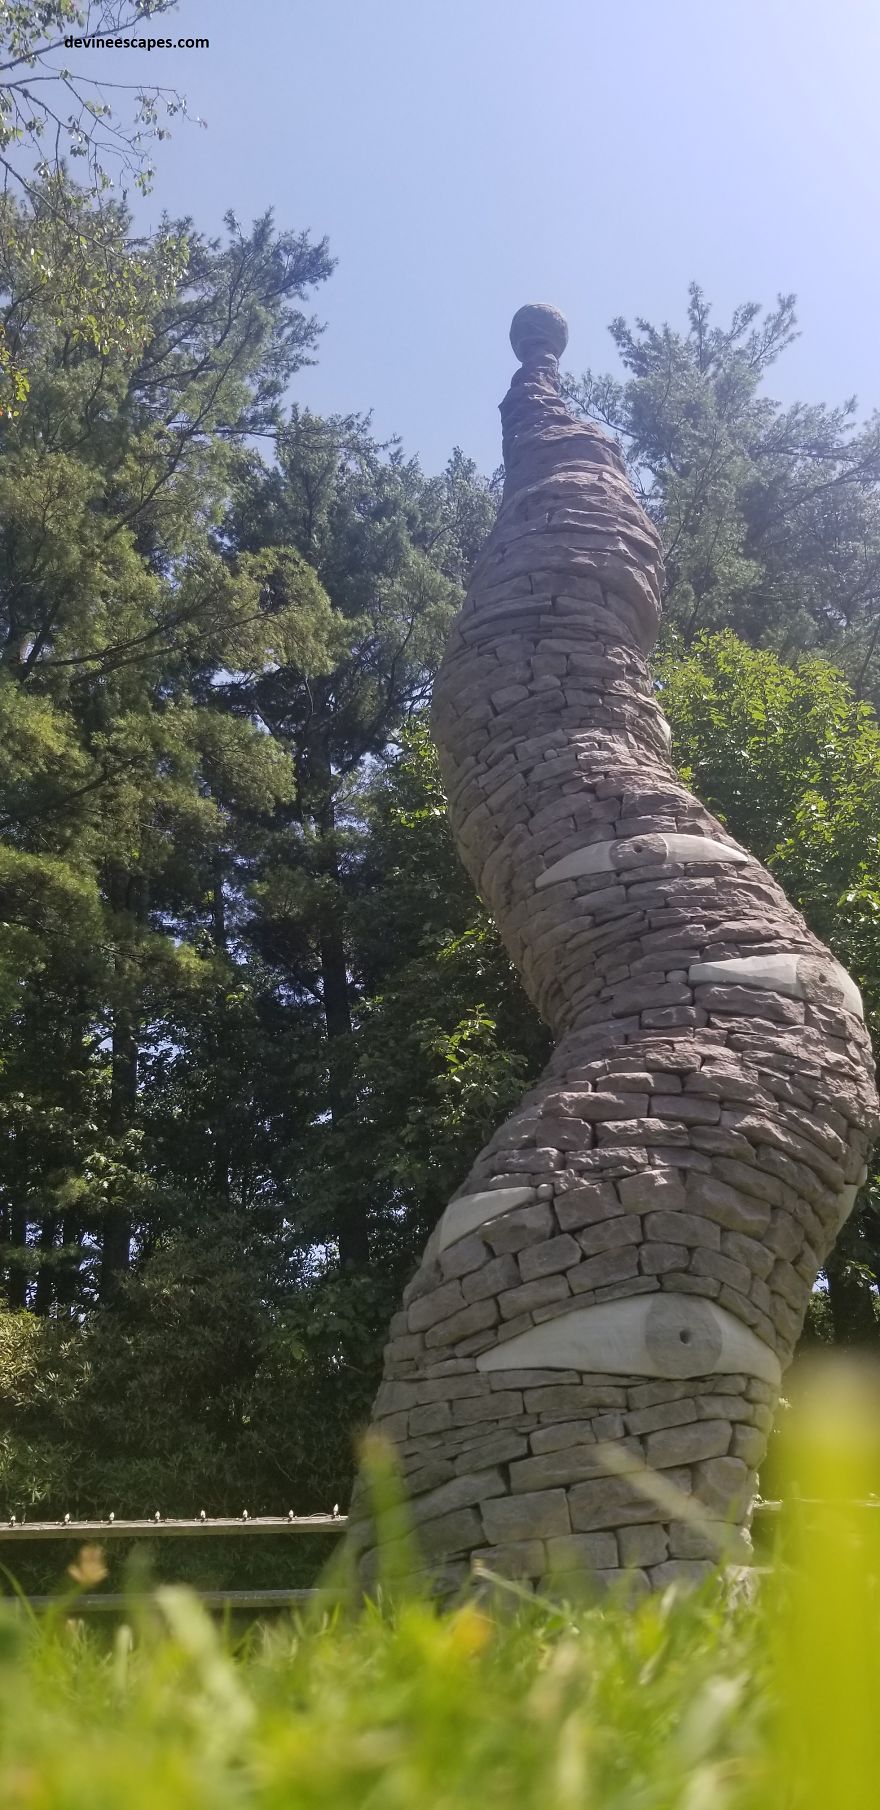 I Built A Seven Foot-Plus Tall Tentacle, With Eyes All Over, From Pieces Of Stone